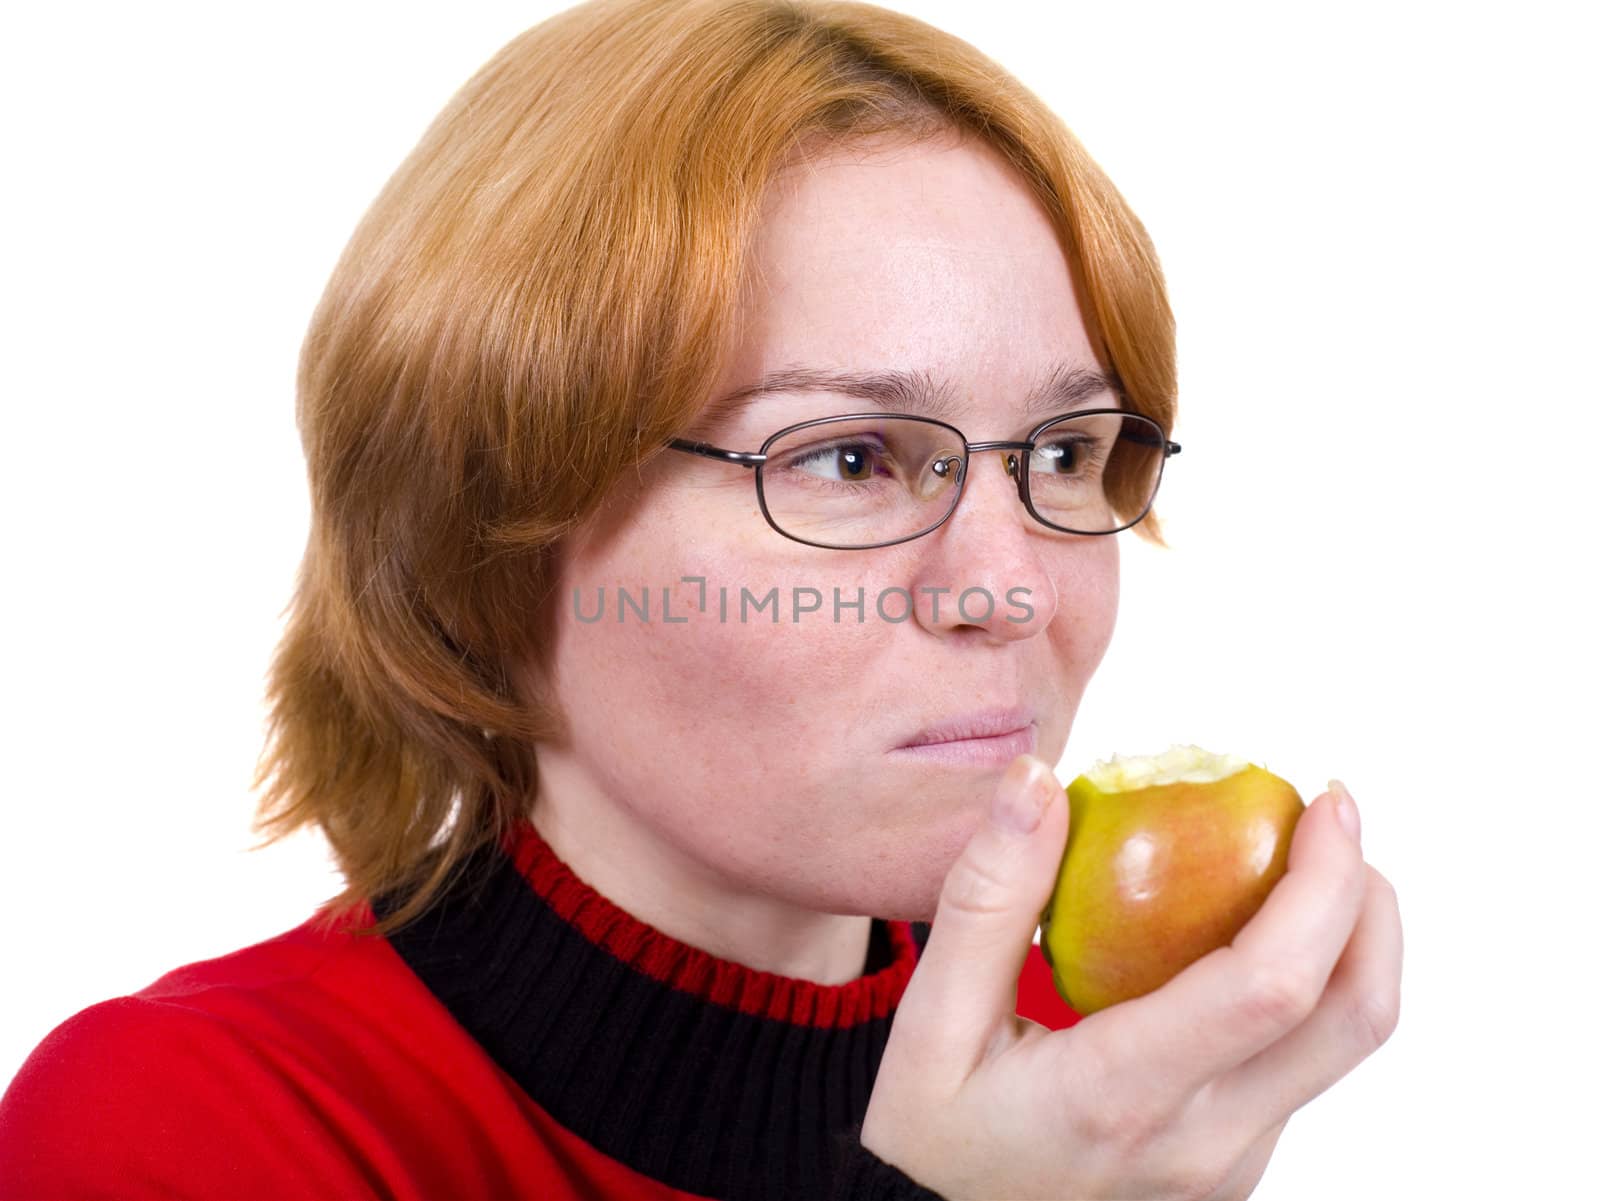 The girl in a red sweater eats an green apple